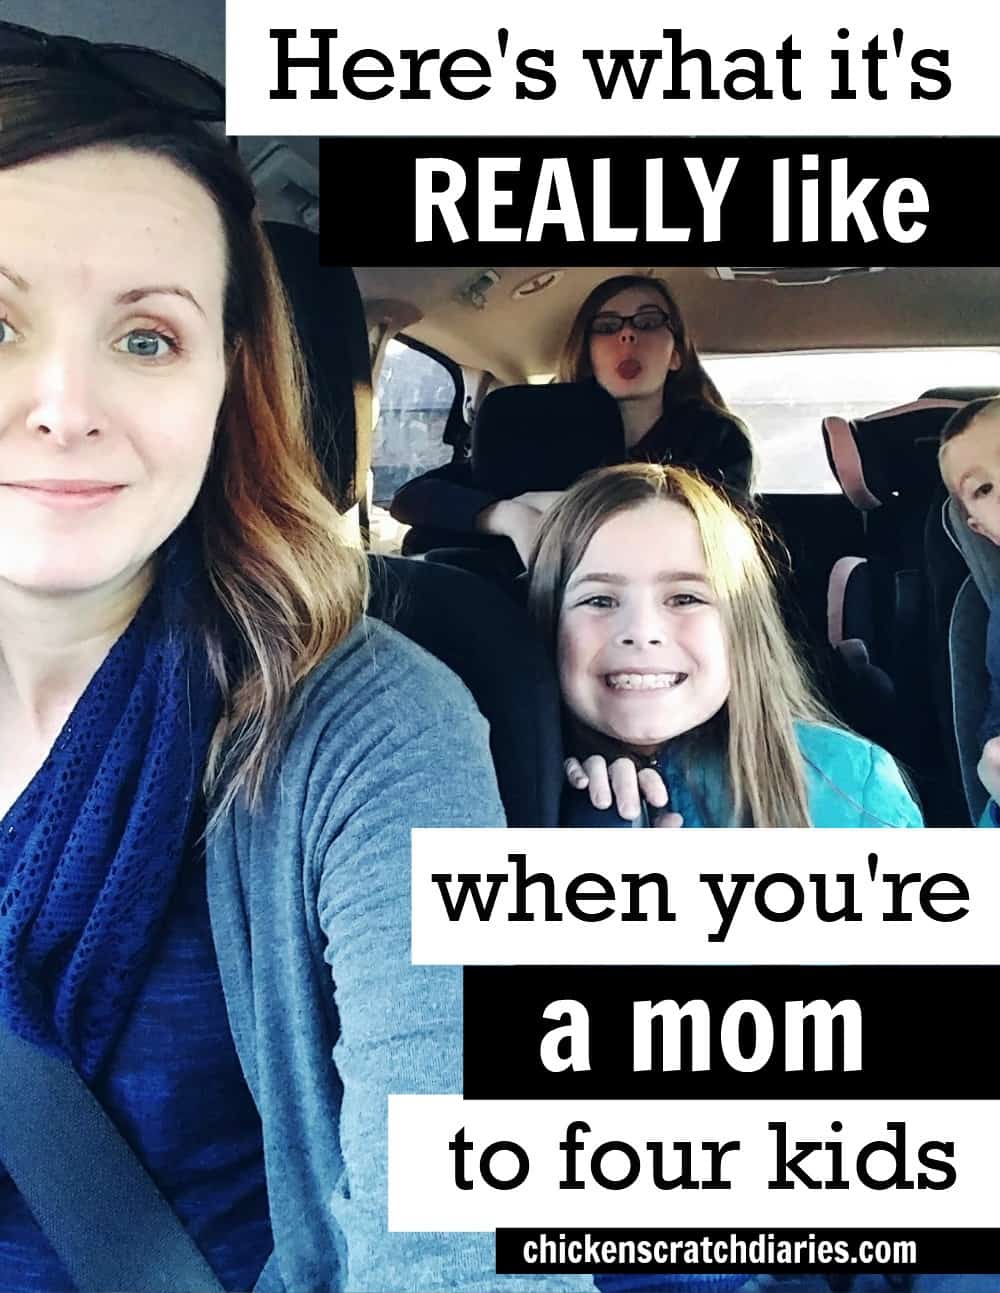 graphic of mom in a minivan and three kids in the background with text overlay- Here's what it's really like when you're a mom to four kids.